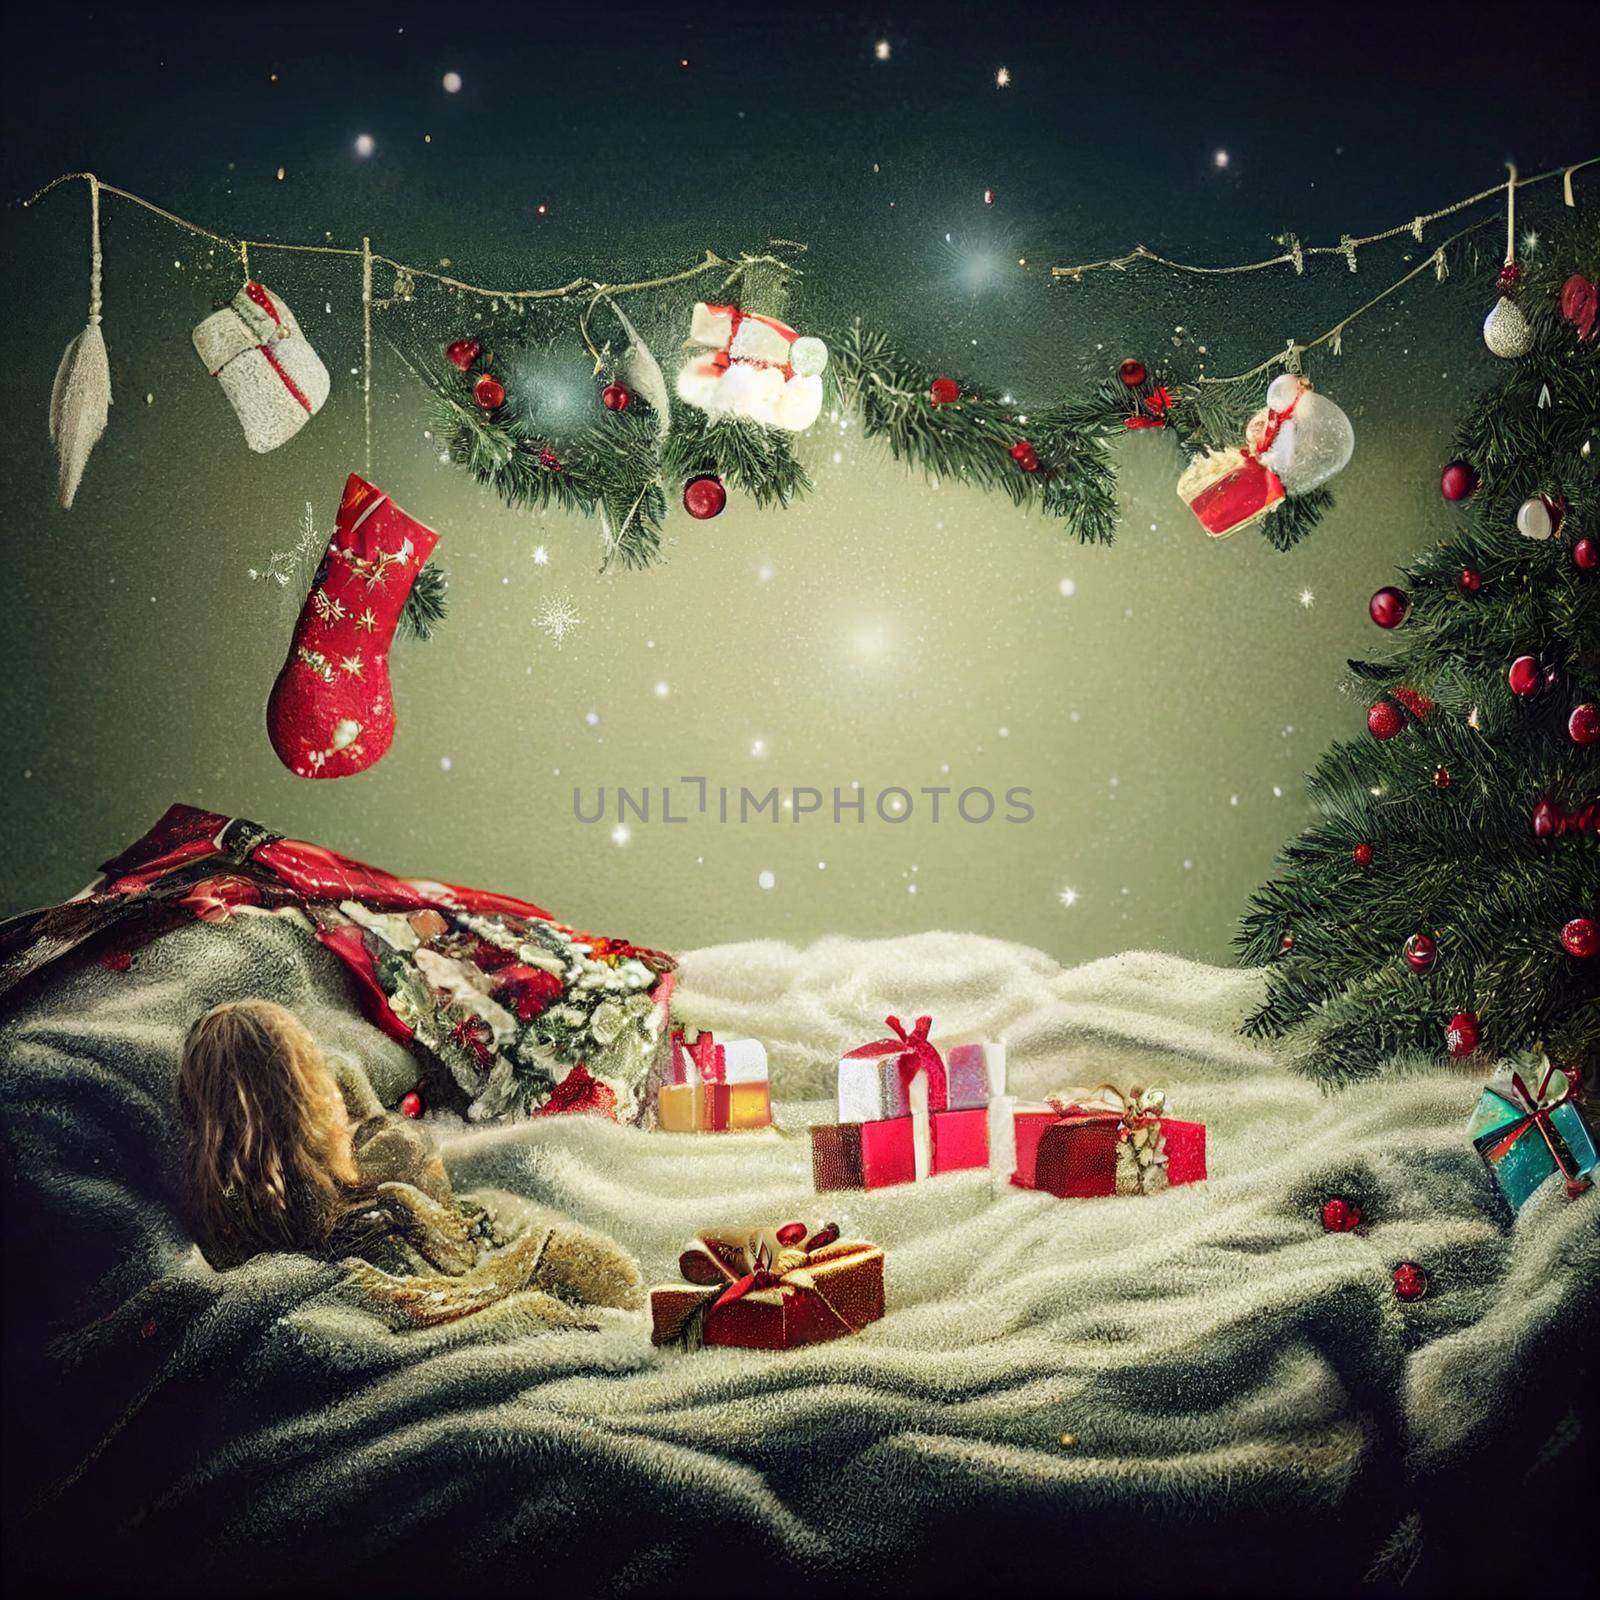 a large number of New Year's gifts on a snow blanket and Christmas trees. High quality illustration